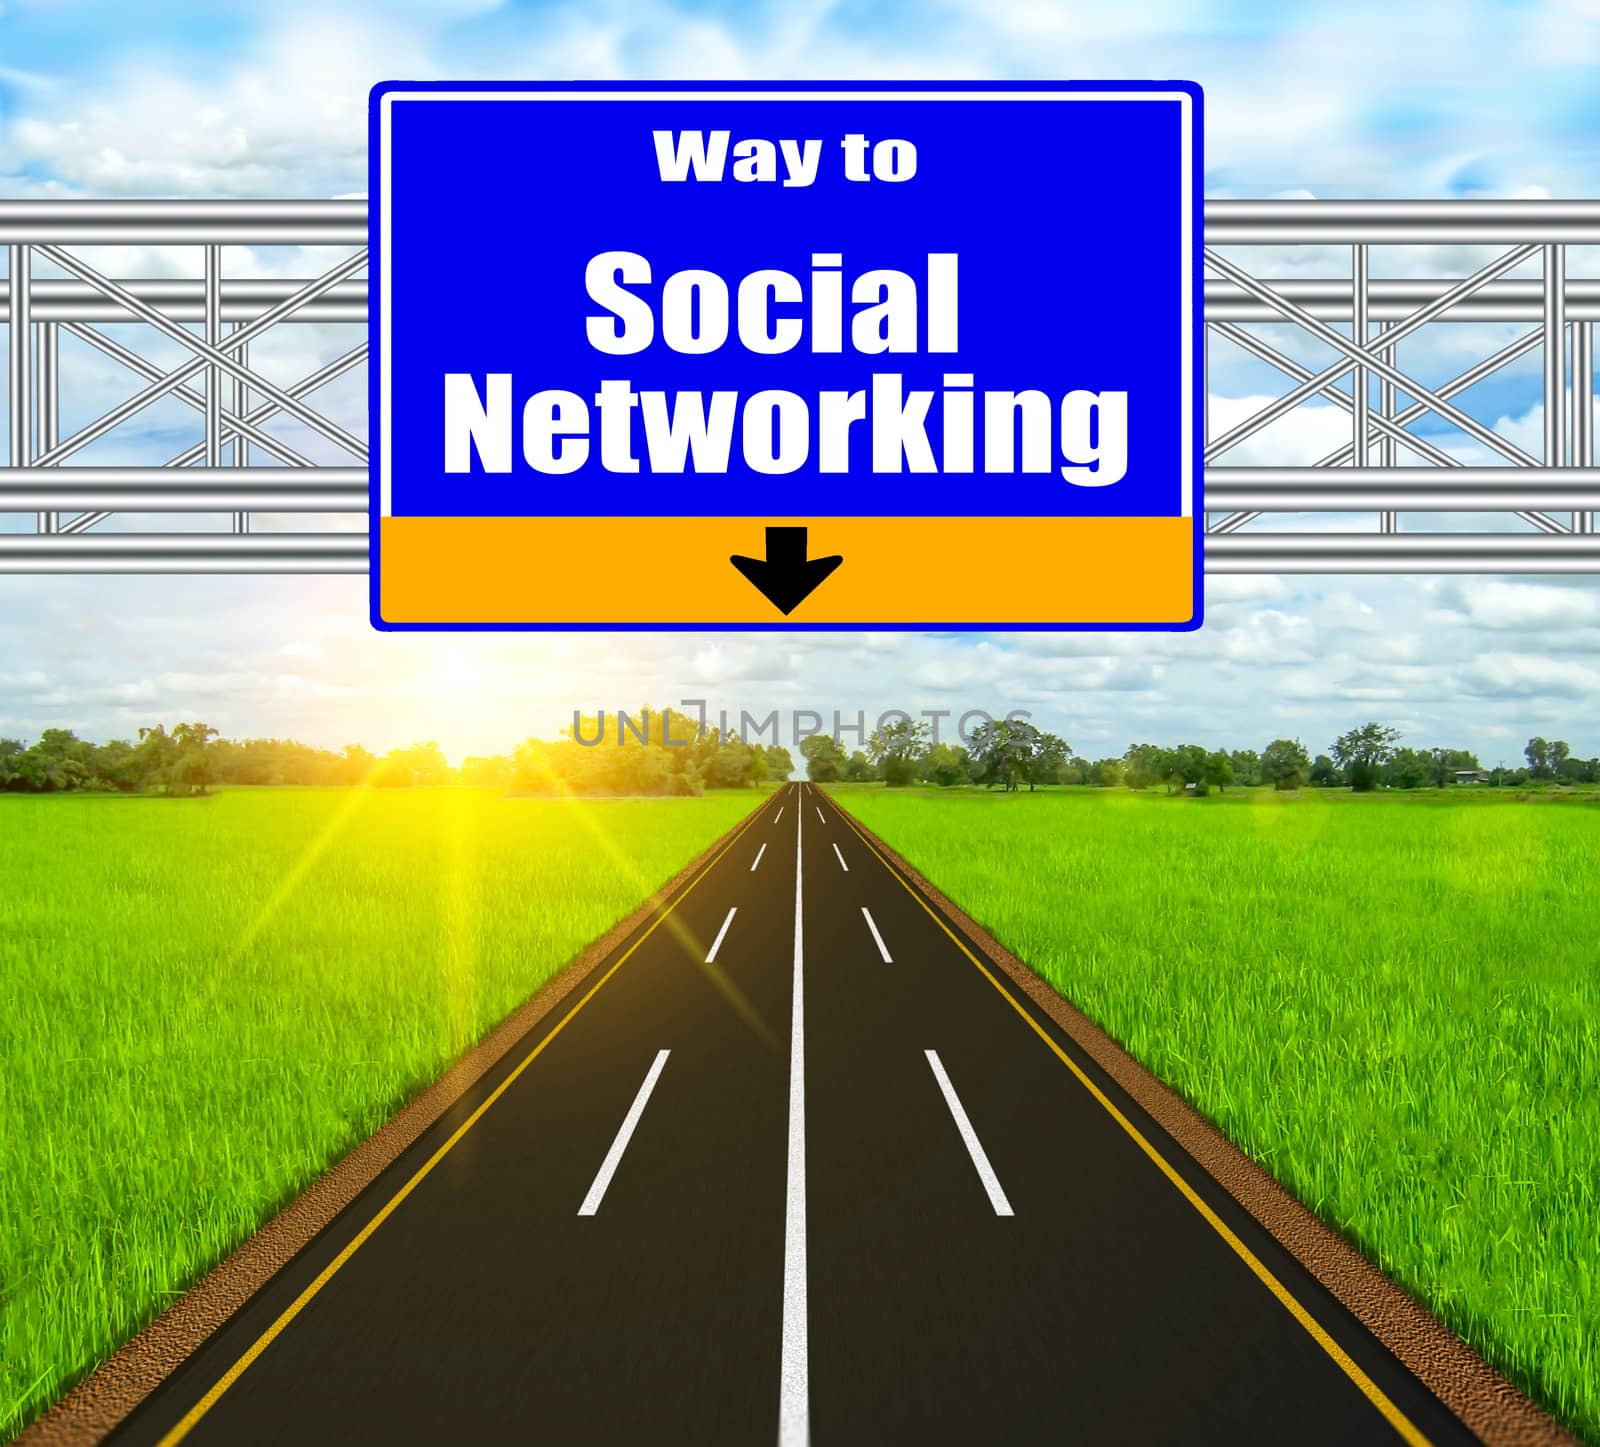 Blue Road Sign concept Social Networking and soft natural landscape background.